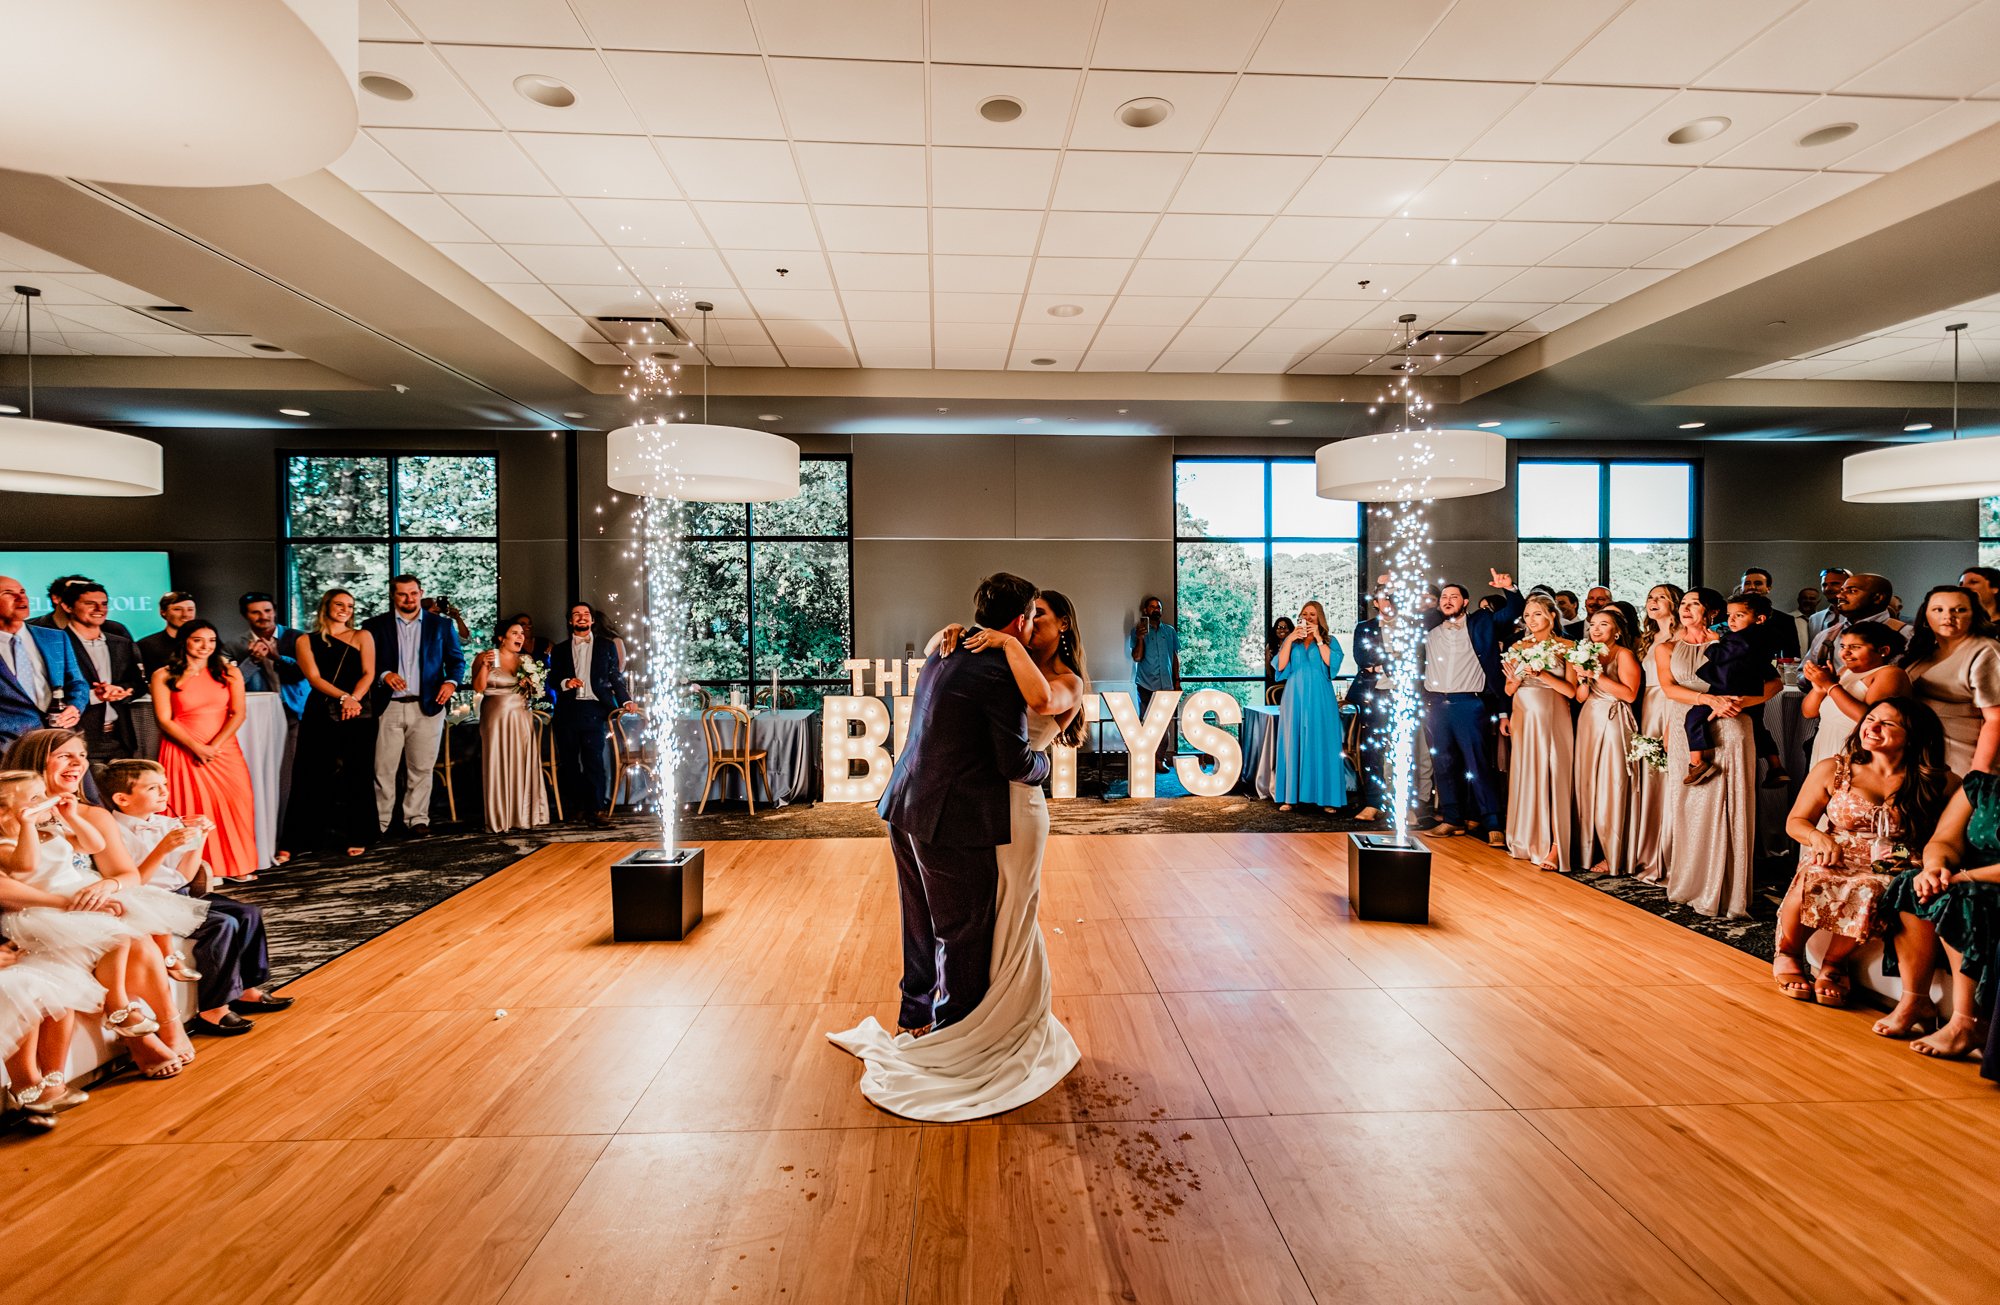 Greenville Sc Weding Day Timeline - first dance and intros-2-3.jpg